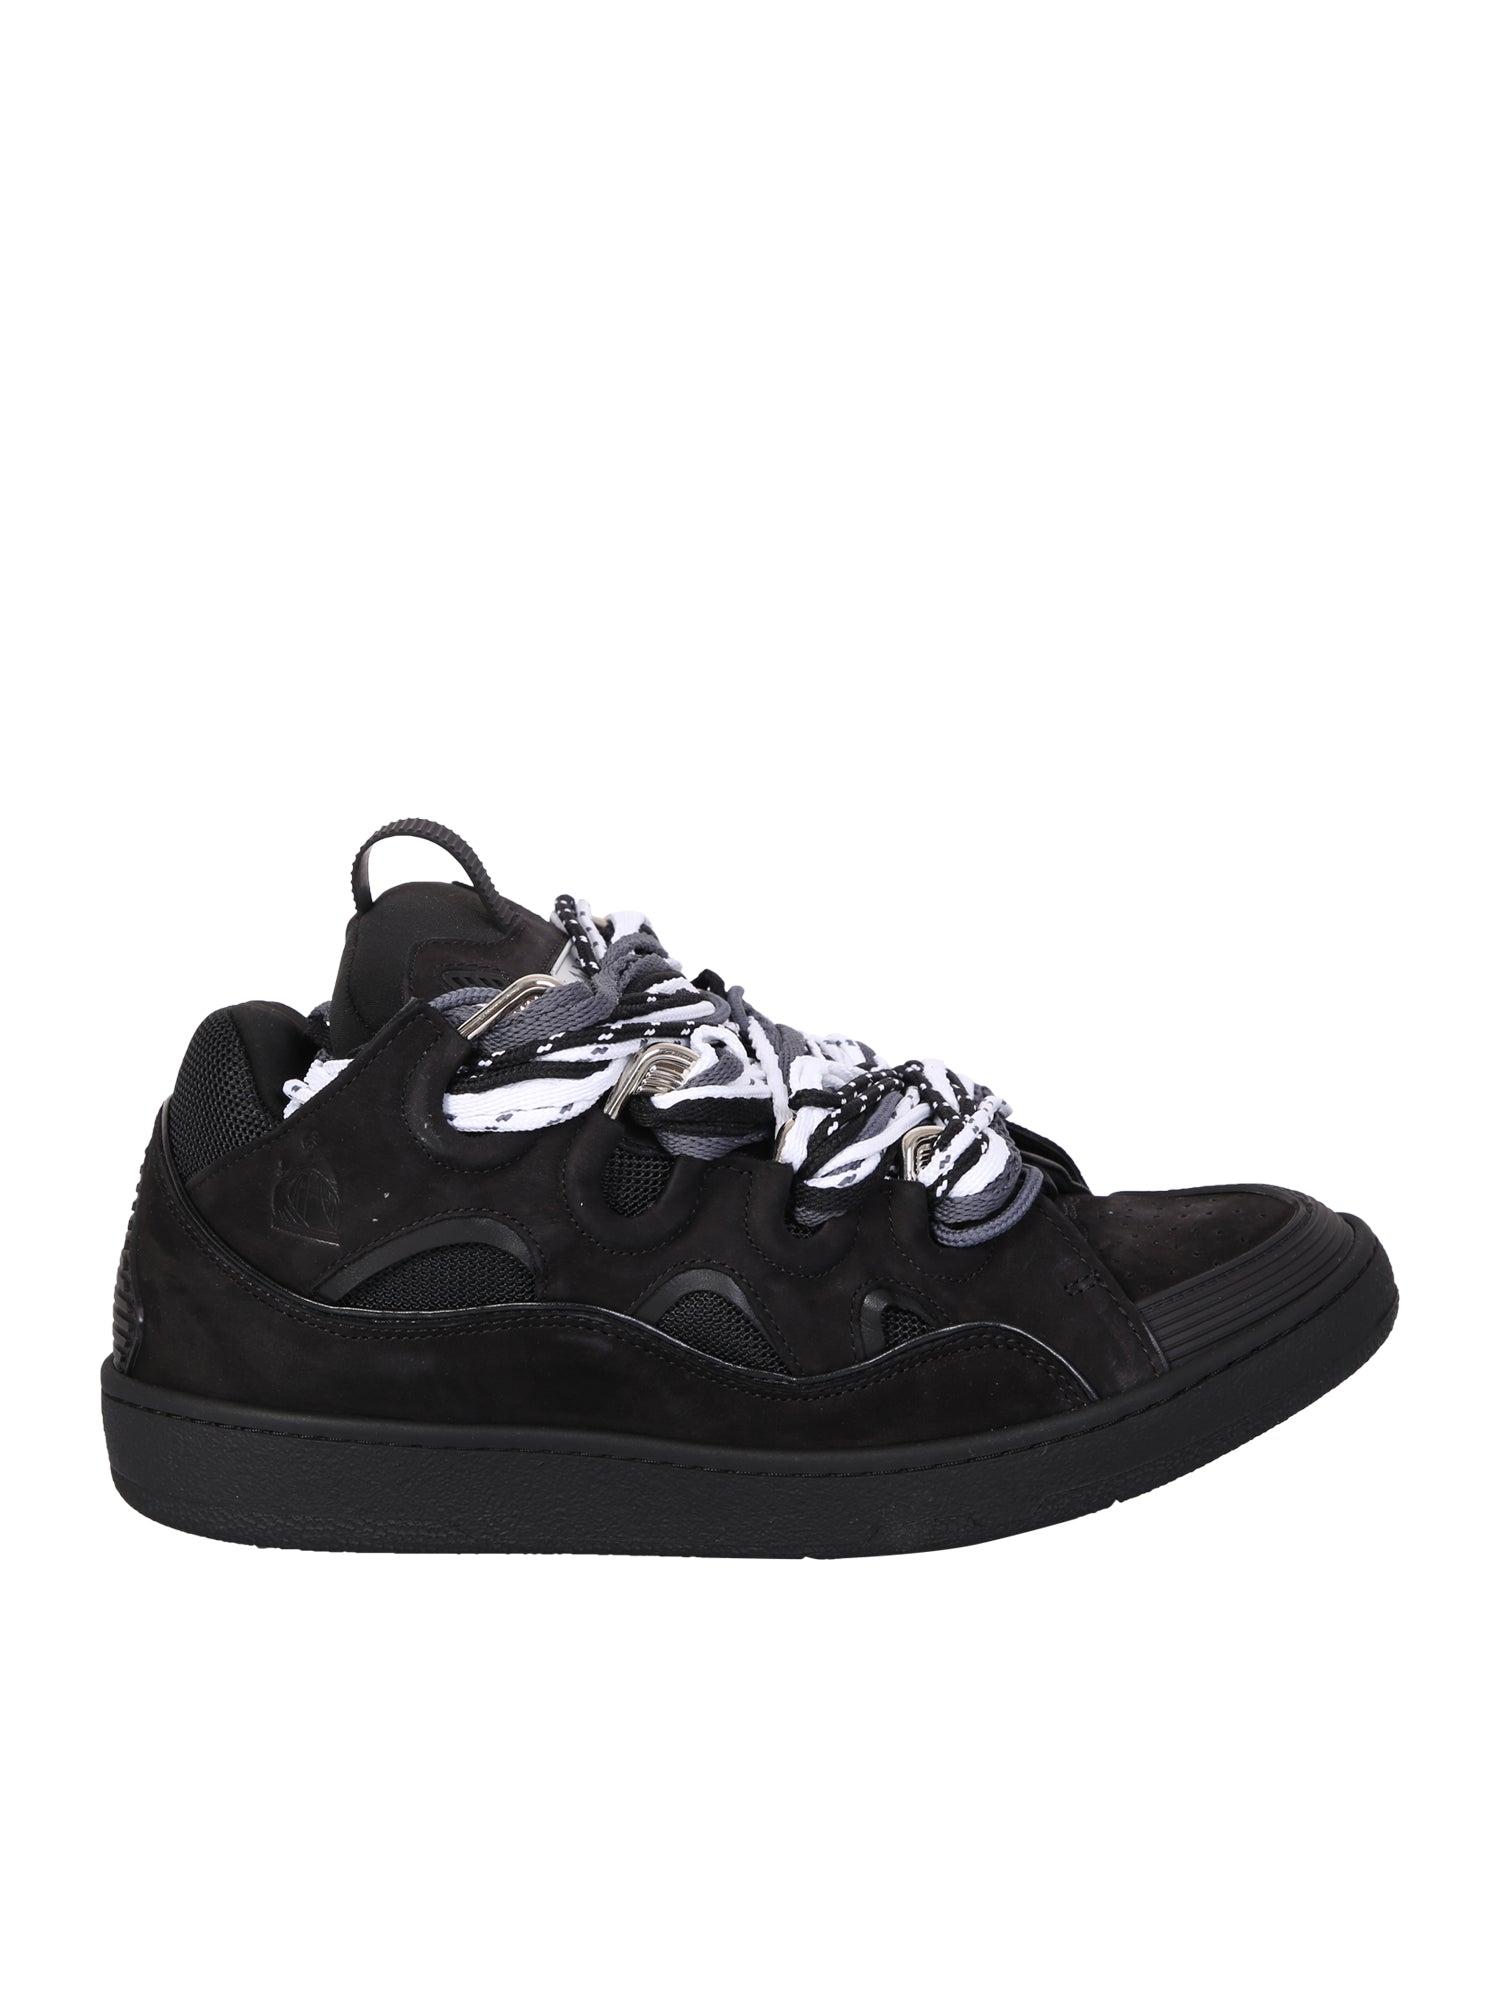 Lanvin Leather Curb Sneakers With A Contemporary Design With ...